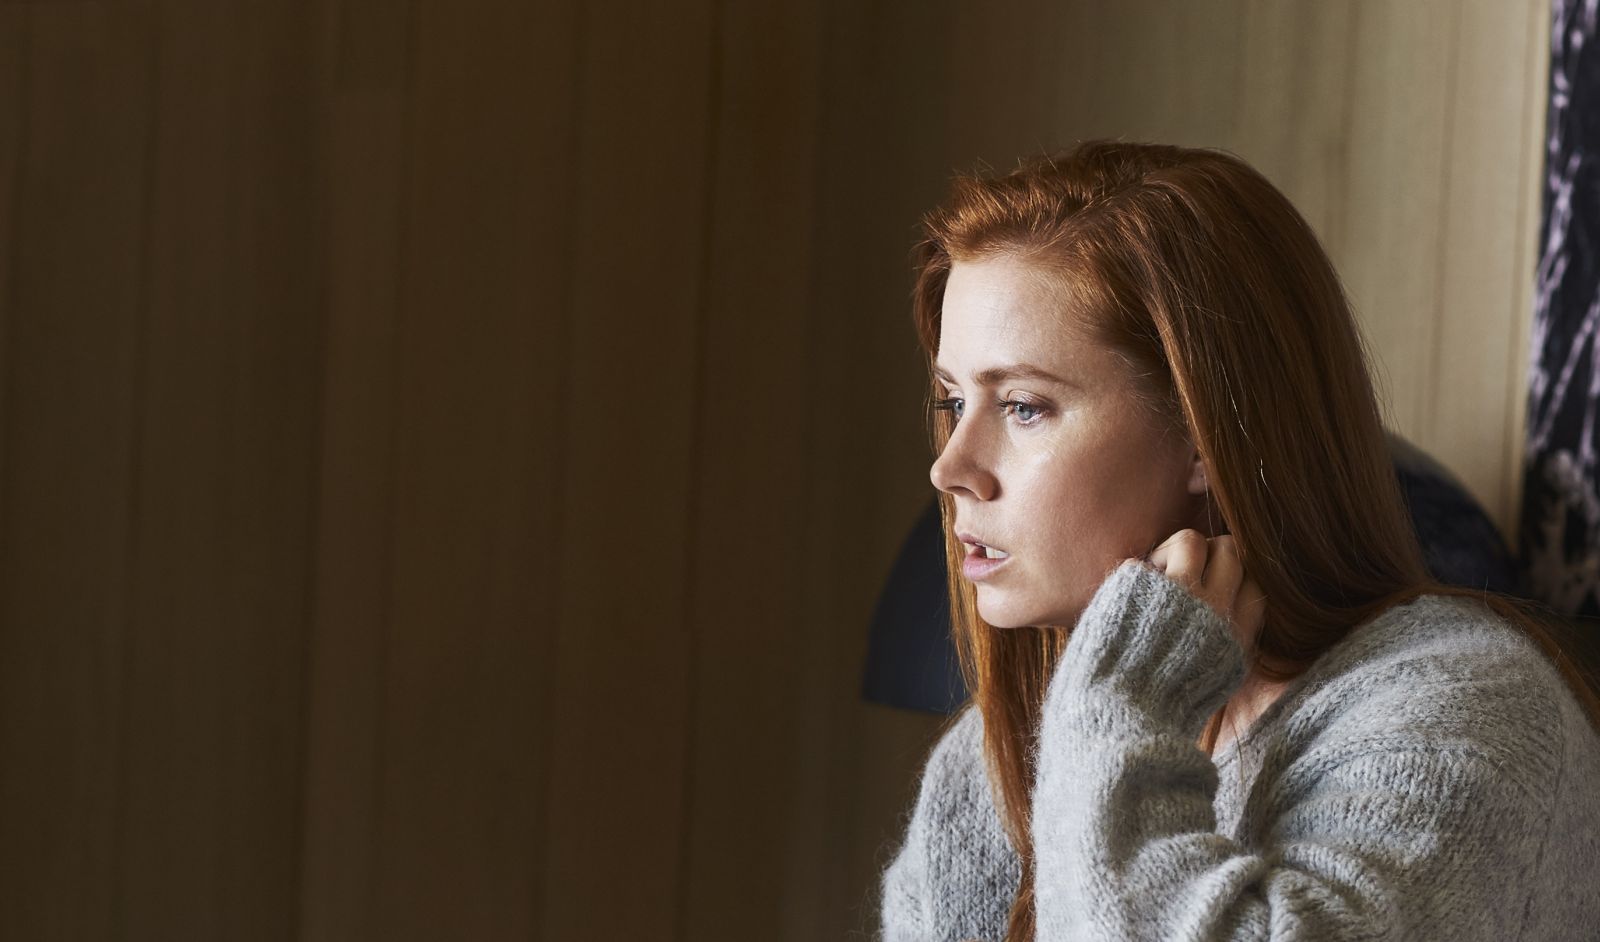 Academy Award nominee Amy Adams stars as Susan Morrow in writer/director Tom Fords romantic thriller NOCTURNAL ANIMALS, a Focus Features release. Credit: Merrick Morton/Focus Features